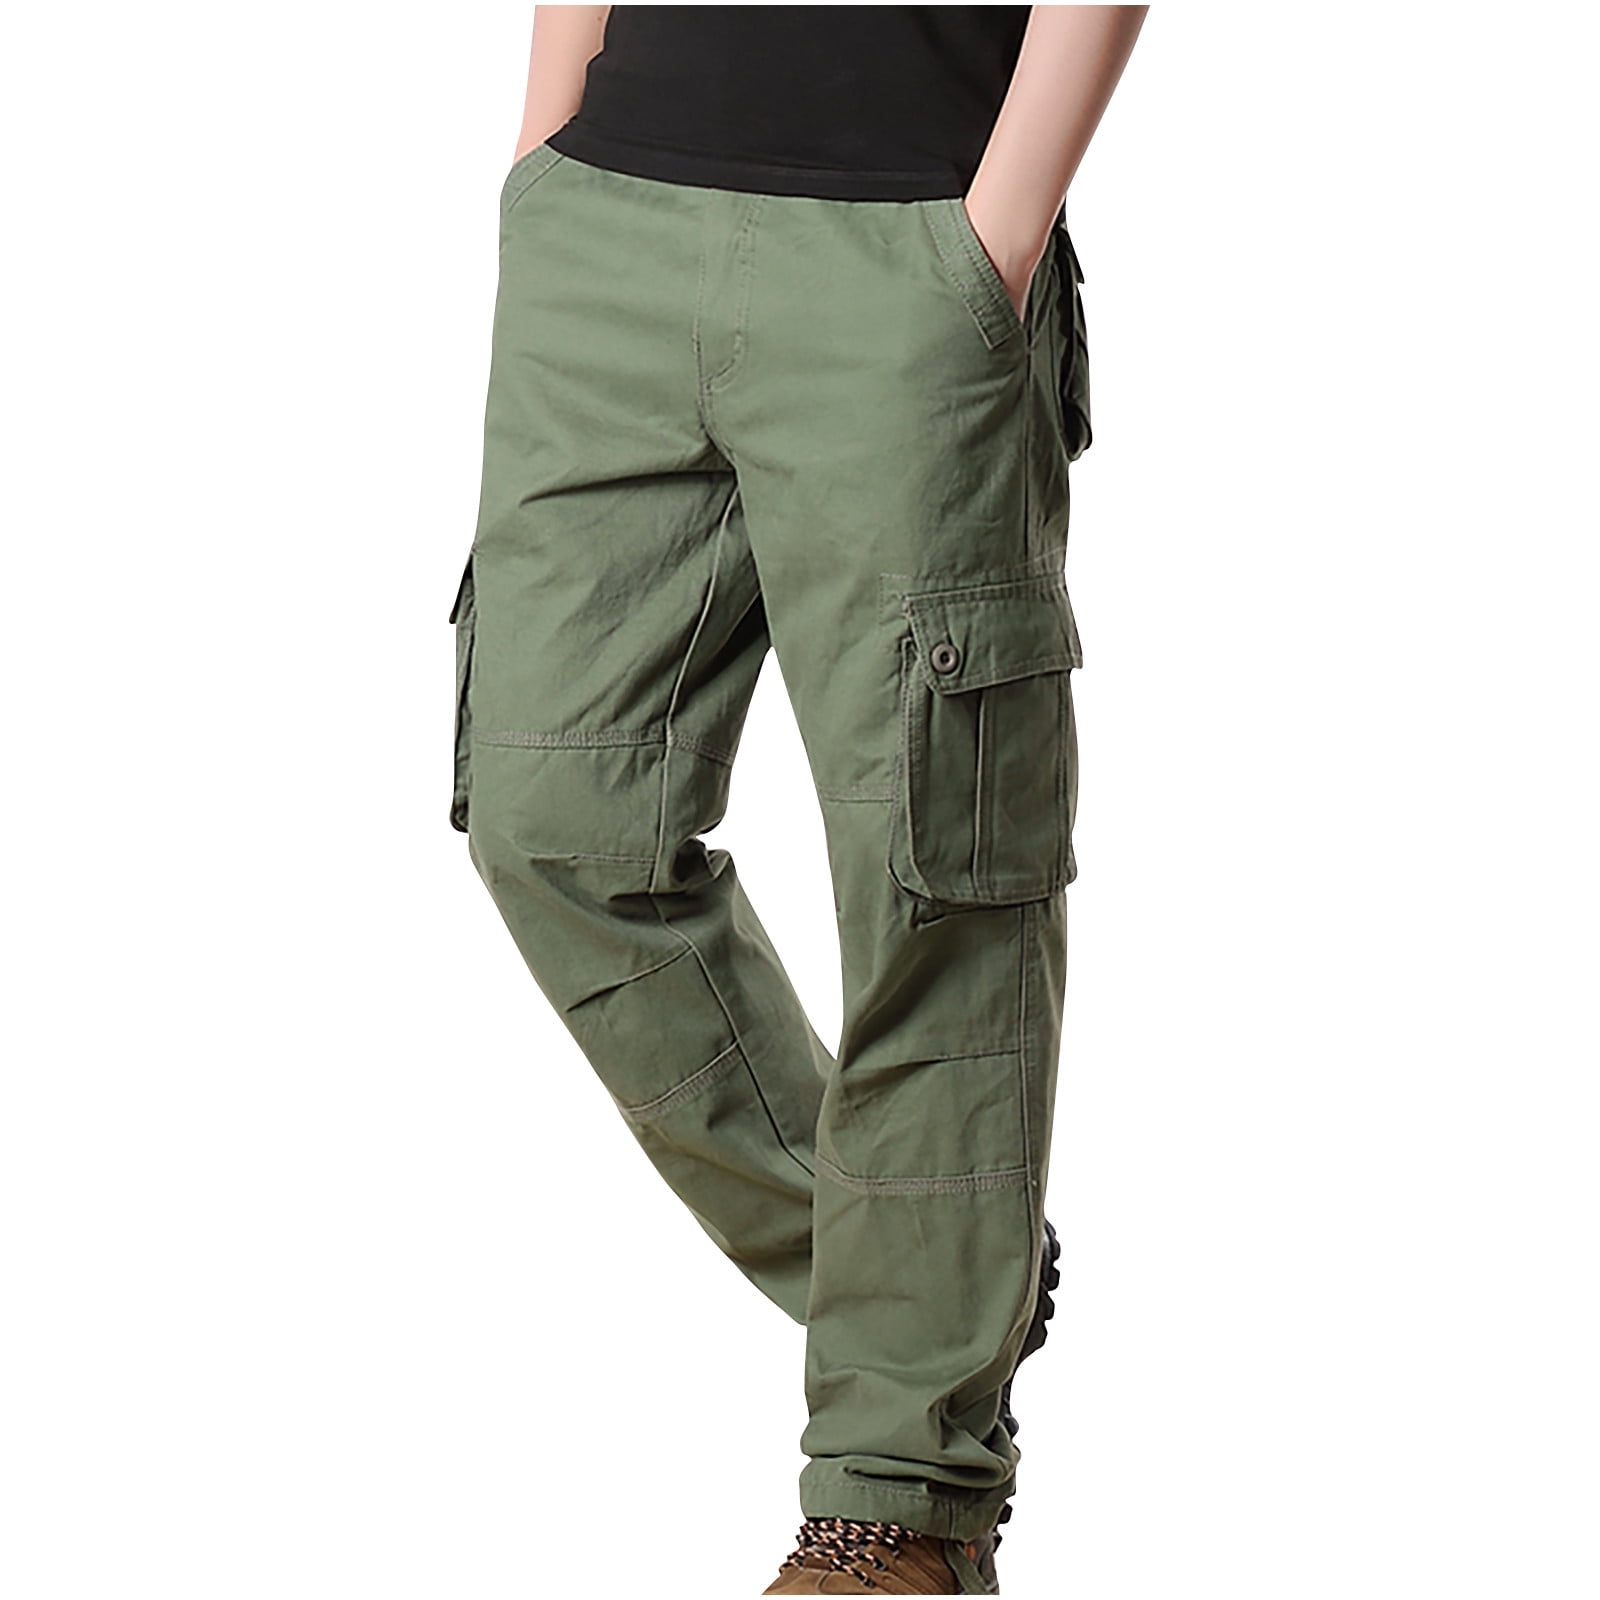 Fartey Men's Loose Fit Cargo Pant with Multi Pockets Hiking Workout Sweatpants Lounge Elastic Waist Drawstring Joggers Fishing Pants for Men, Size